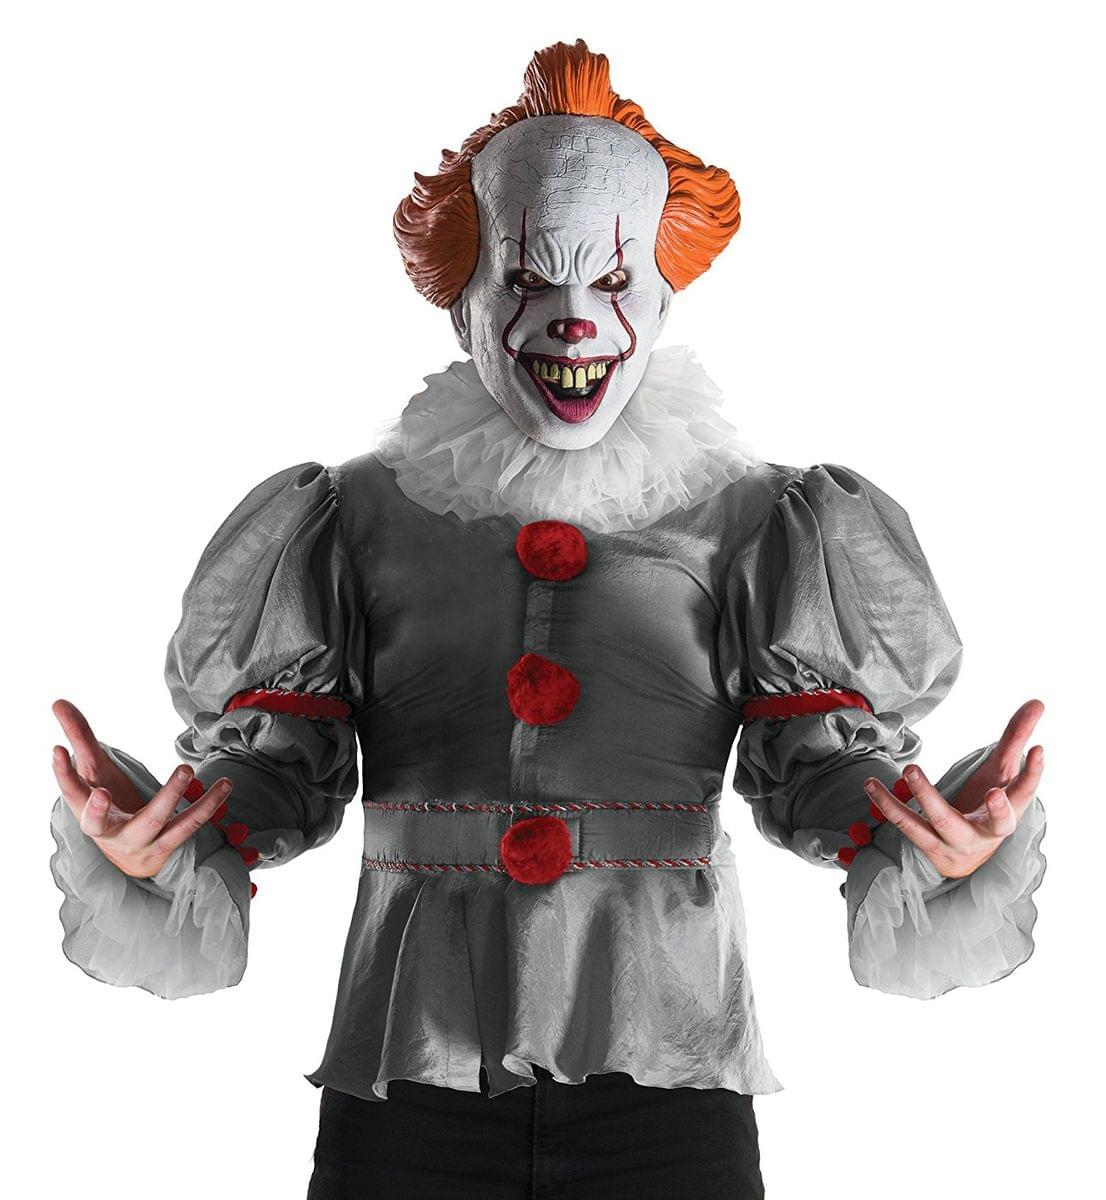 IT (2017 Film) Pennywise Adult Costume